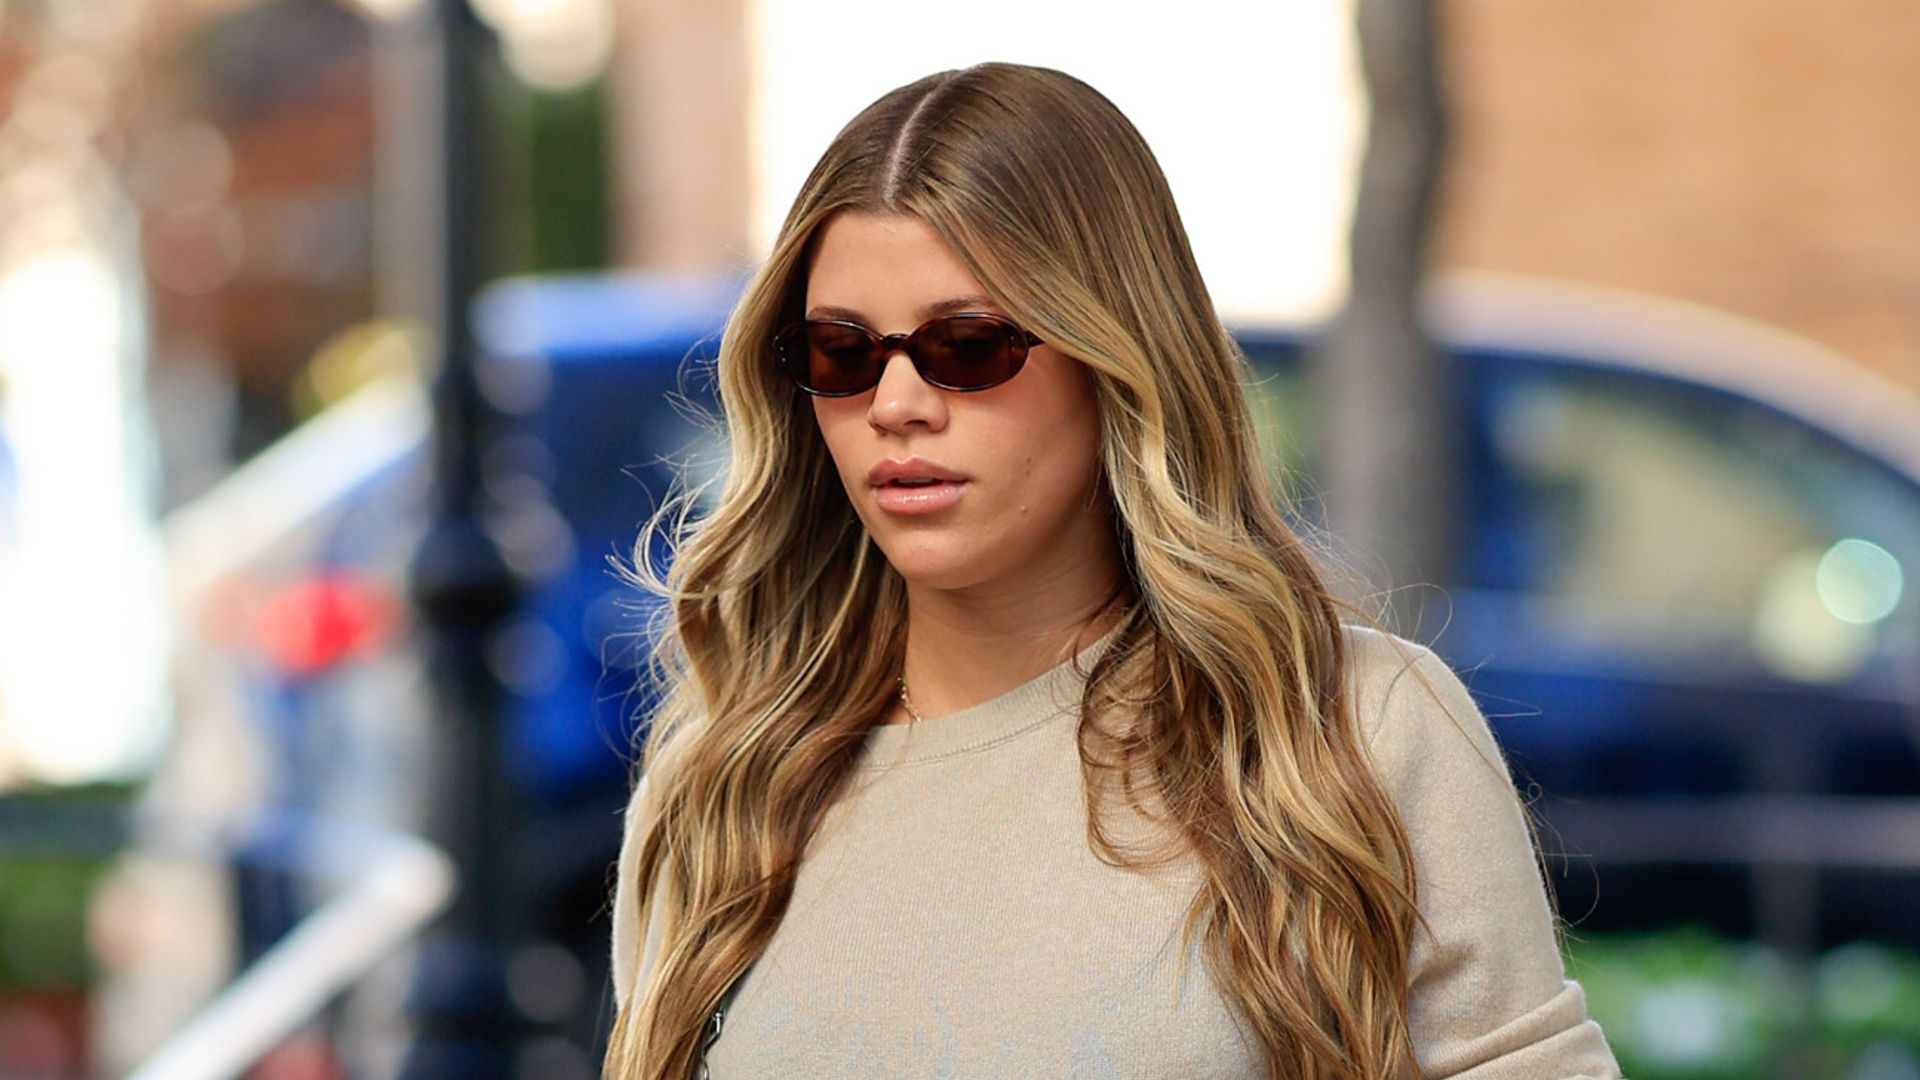 LOS ANGELES, CA - JANUARY 29: Sofia Richie Grainge is seen on January 29, 2024 in Los Angeles, California.  (Photo by Rachpoot/Bauer-Griffin/GC Images)